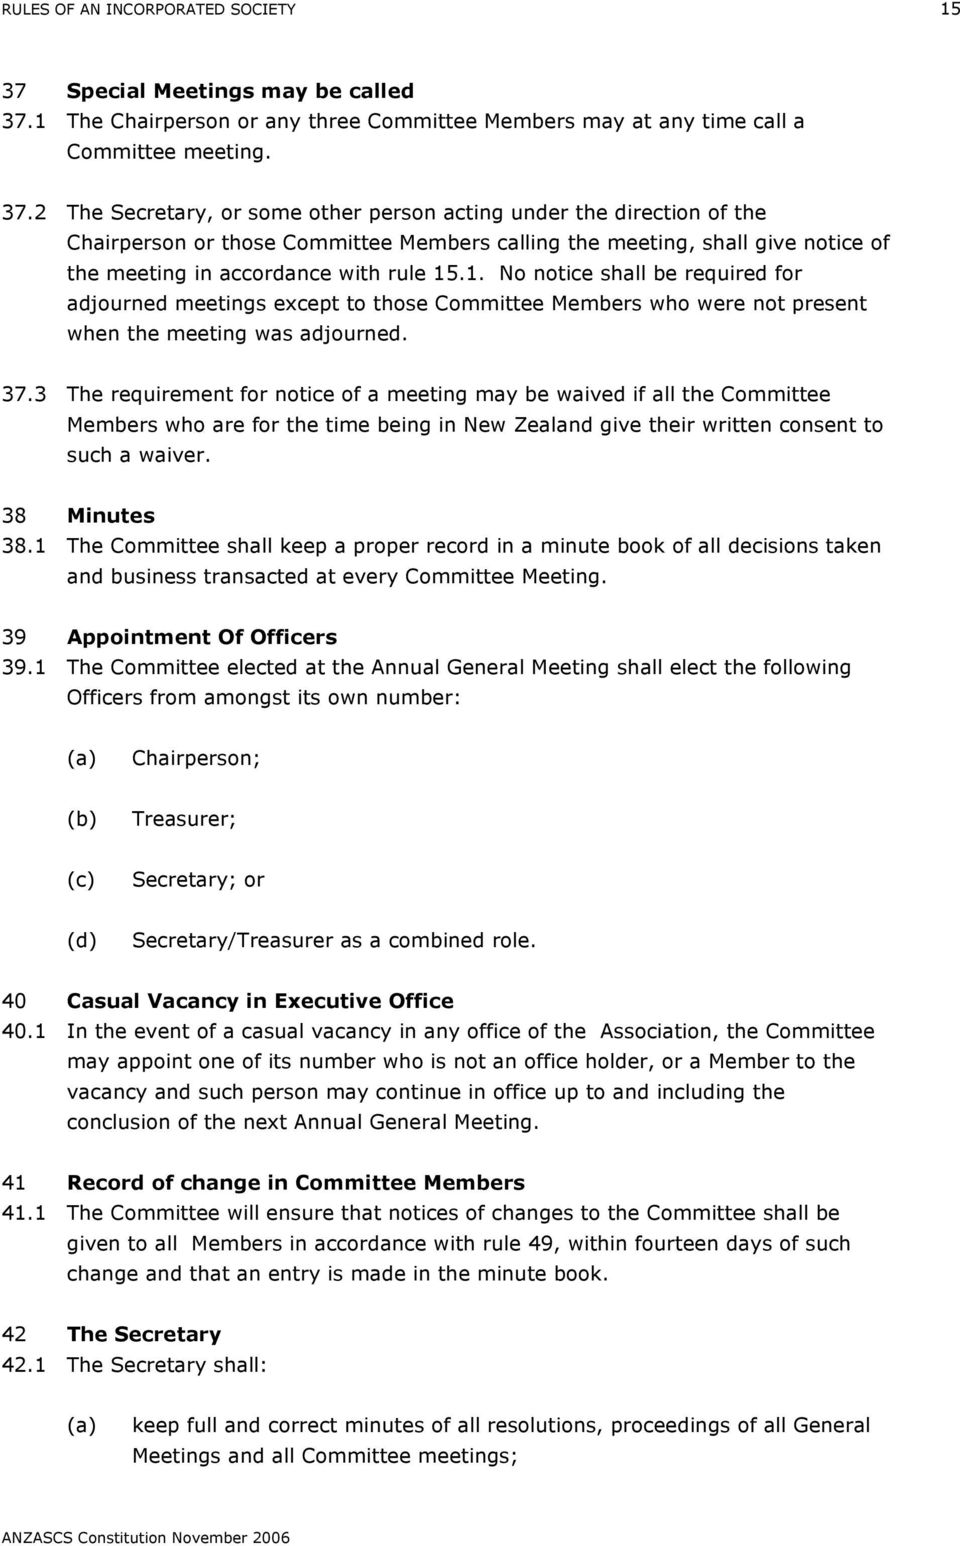 1 The Chairperson or any three Committee Members may at any time call a Committee meeting. 37.